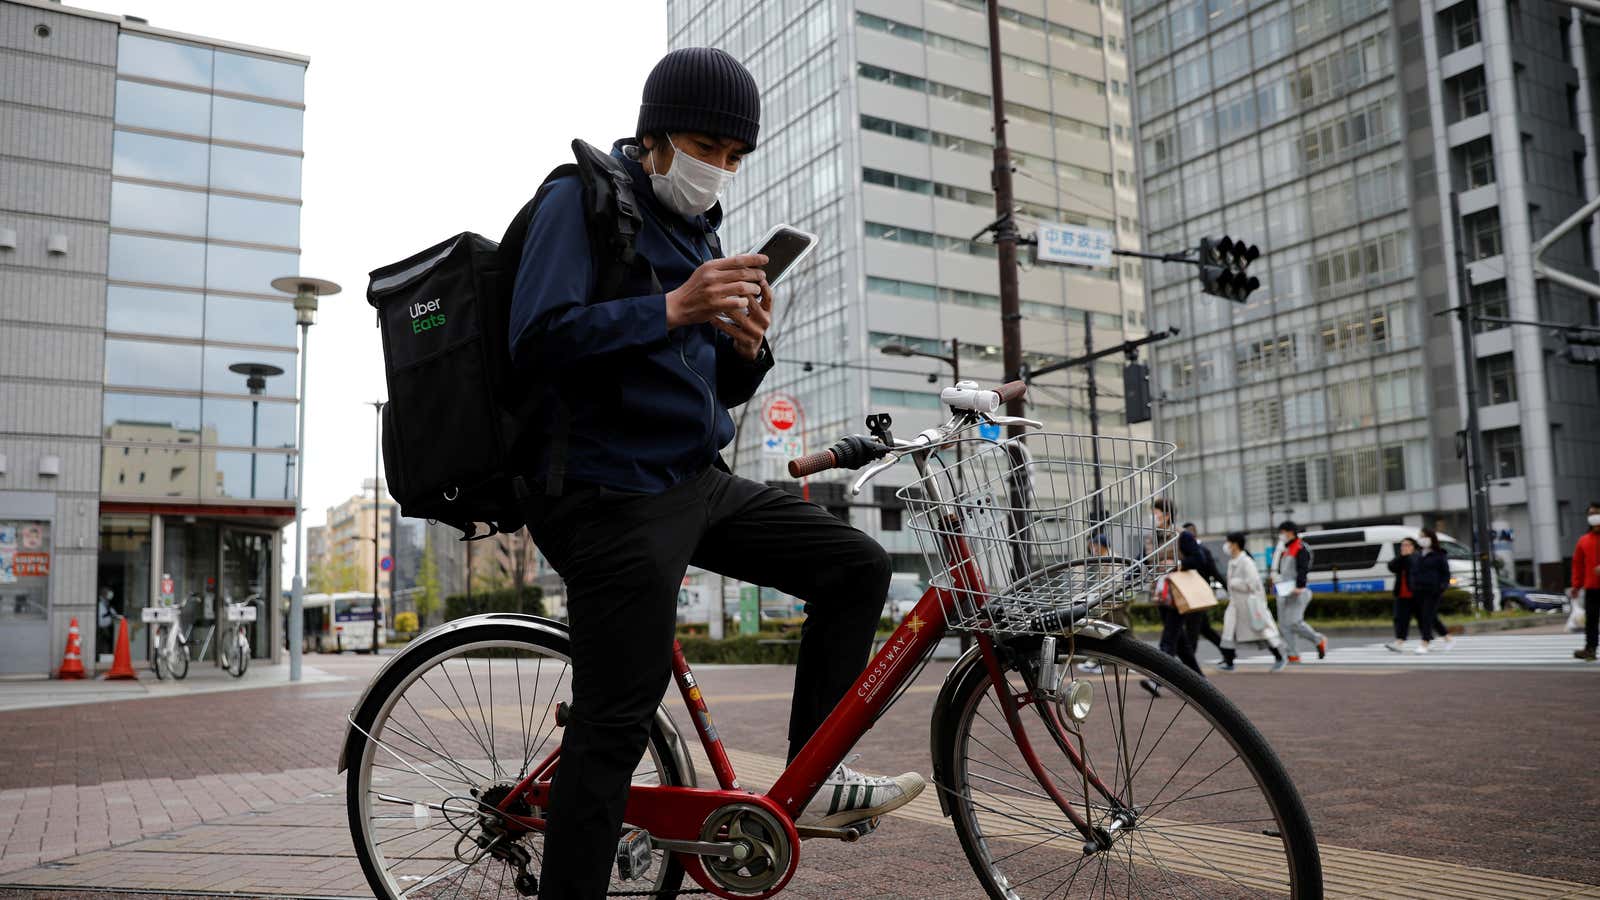 Taiga Fukutani, a comedian whose entertainment bookings dried up following the coronavirus disease (COVID-19) outbreak, works as an Uber Eats delivery man in Tokyo, Japan April 16, 2020. REUTERS/Kim Kyung-Hoon – RC2O5G9DOT9Q